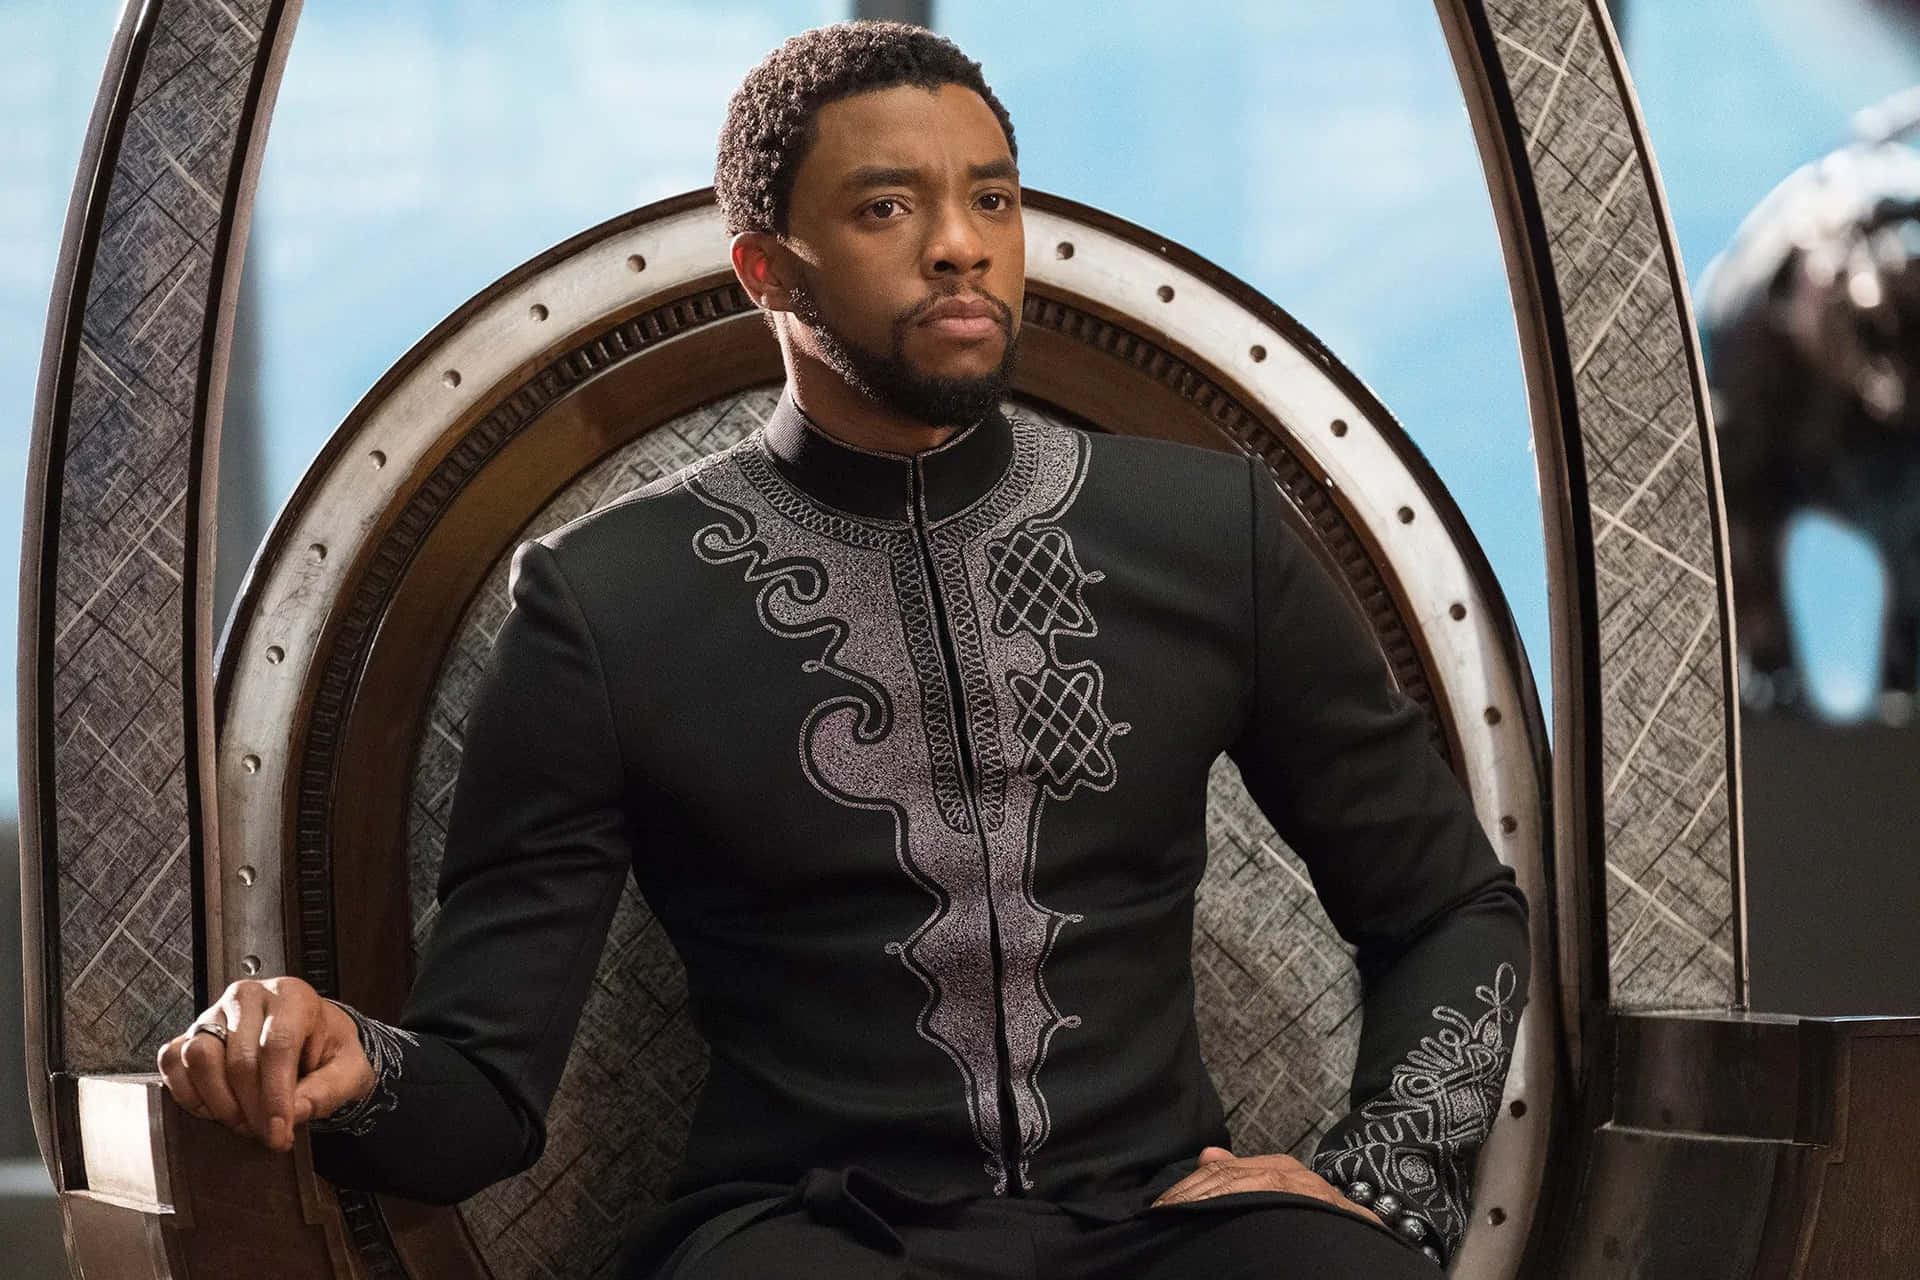 Black Panther Pictures